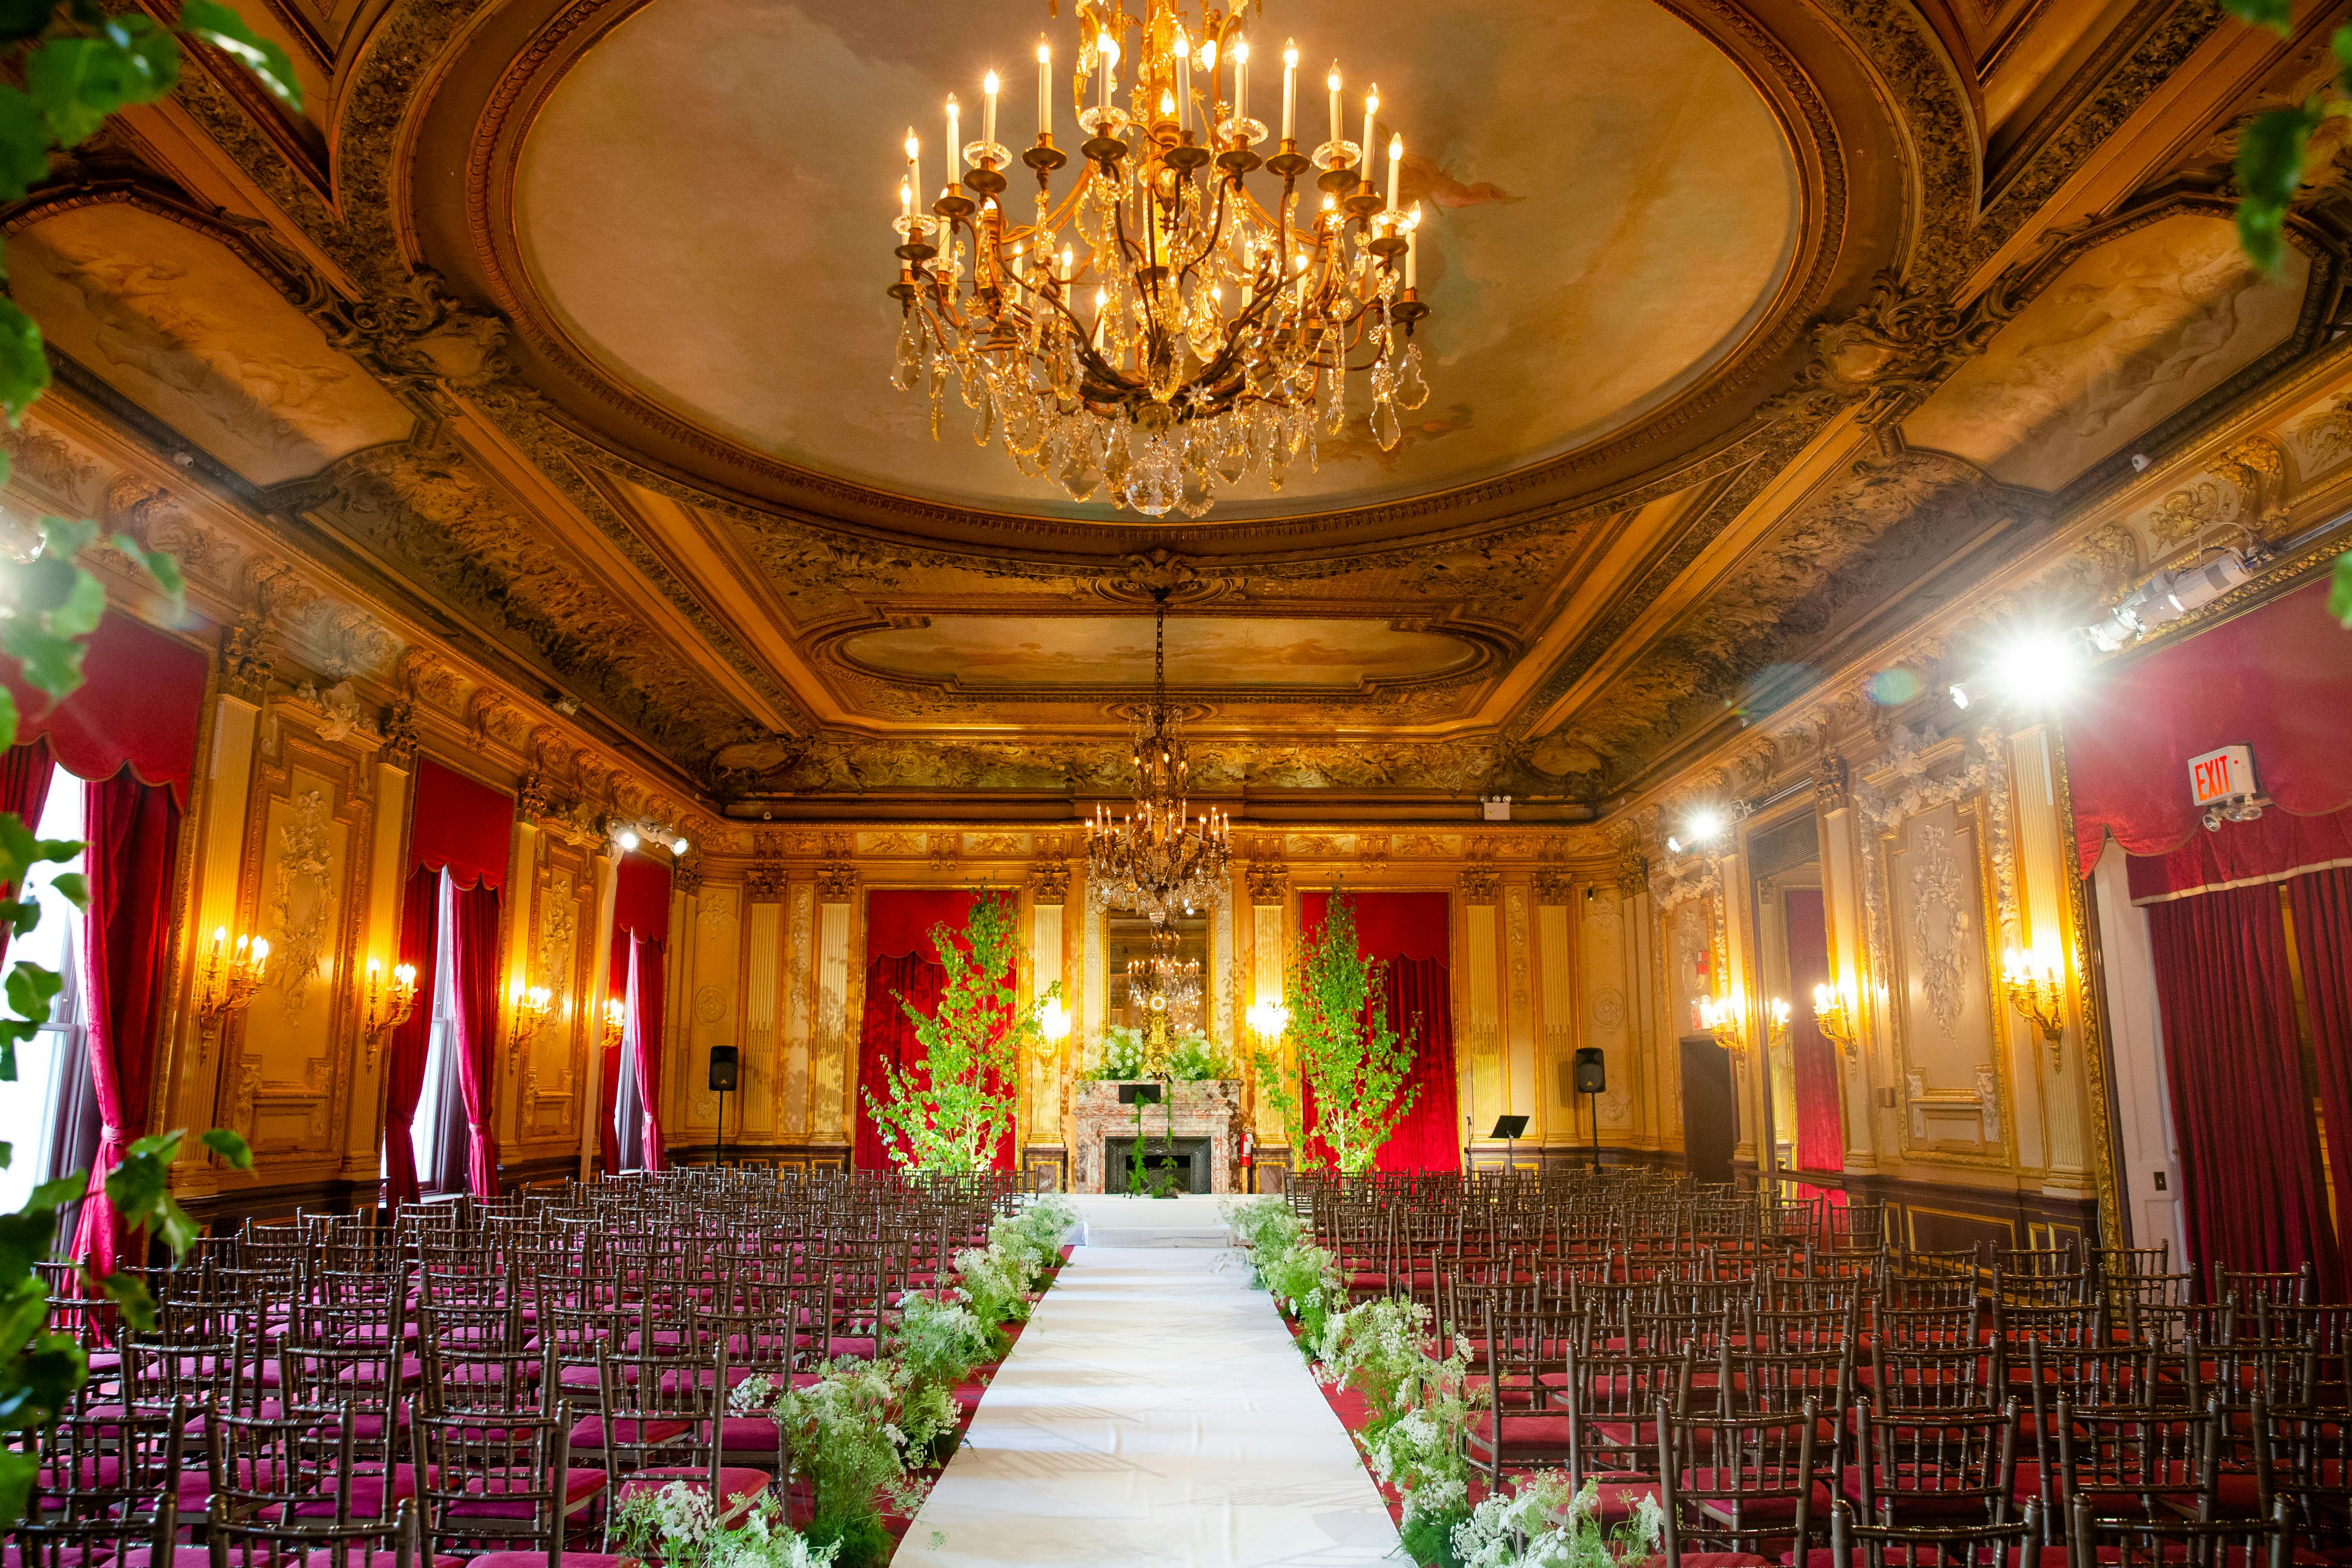 Red and gold wedding ceremony set in an elegant classic theater style venue | PartySlate